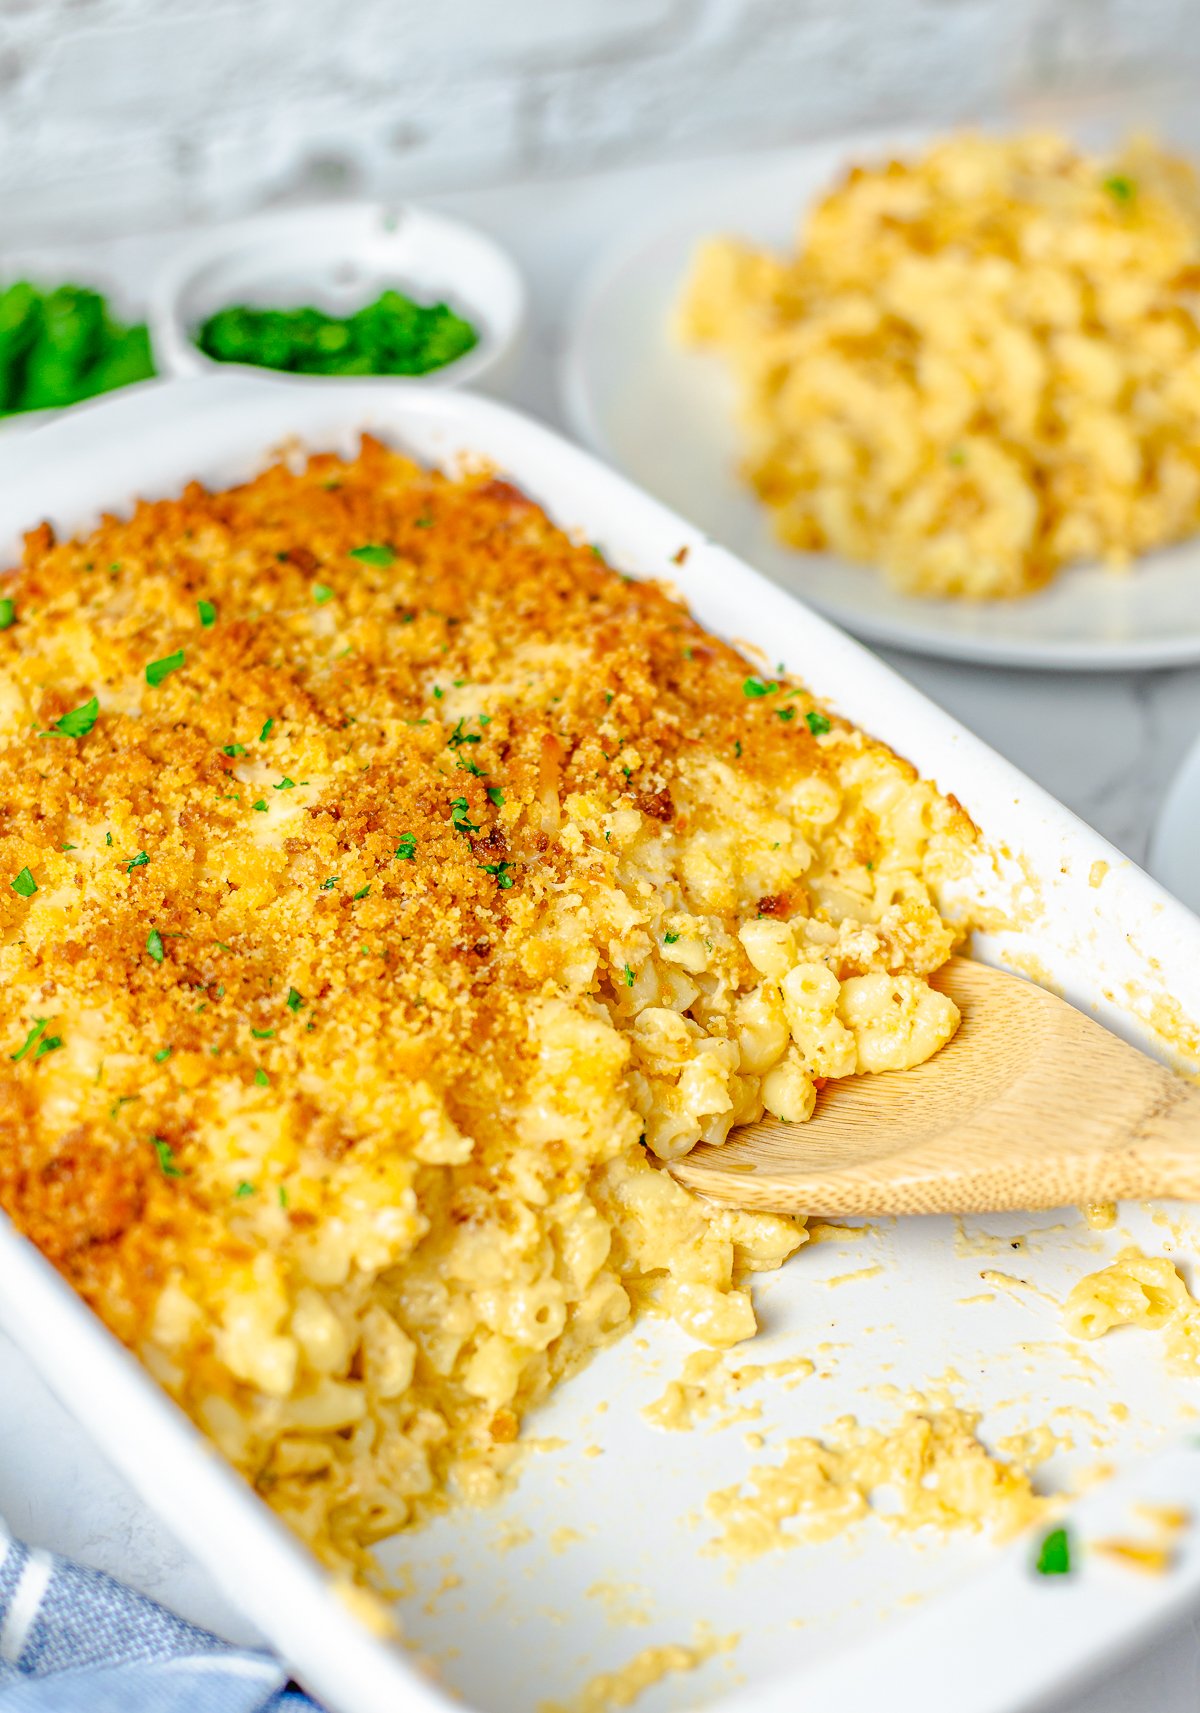 Baking pan with macaroni and cheese missing with wooden spoon.